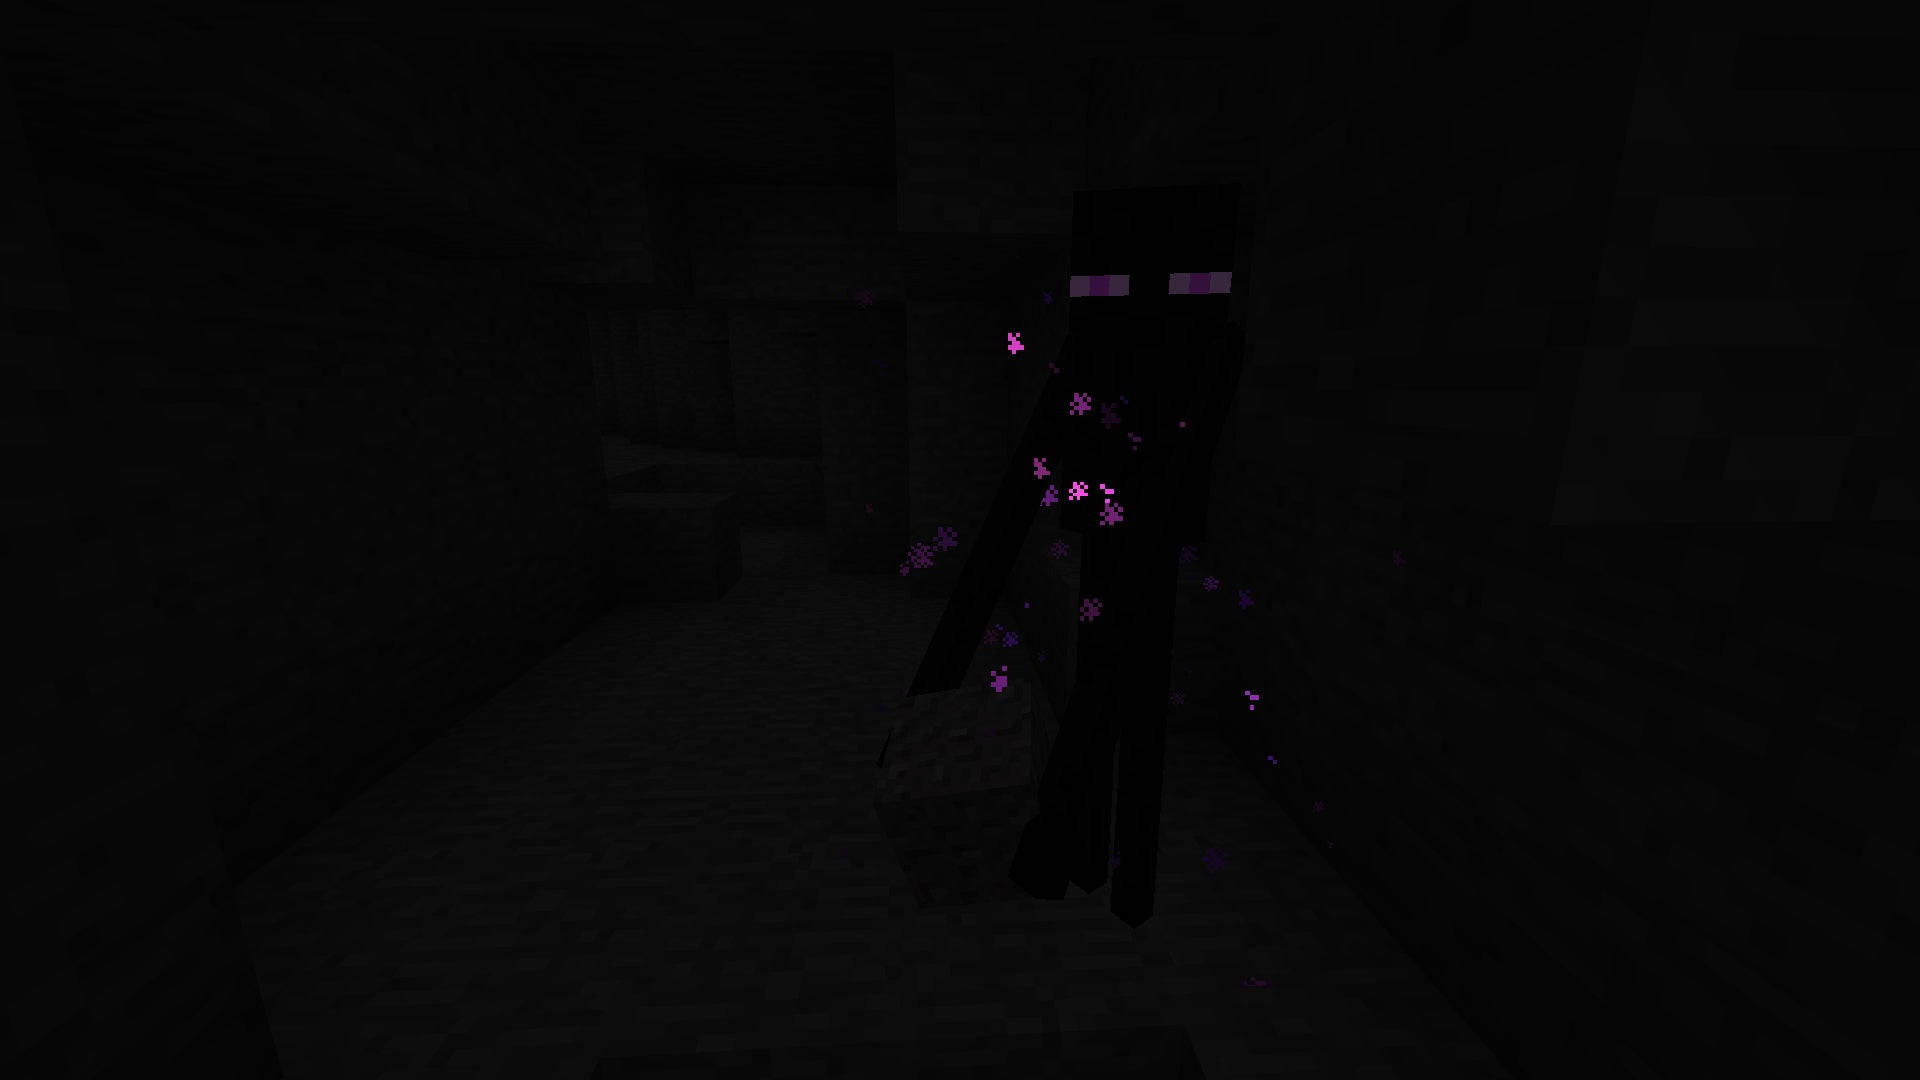 An Enderman, A Unique Creature From The Popular Video Game Minecraft, Captured In A Stunning, High Resolution Image. Wallpaper